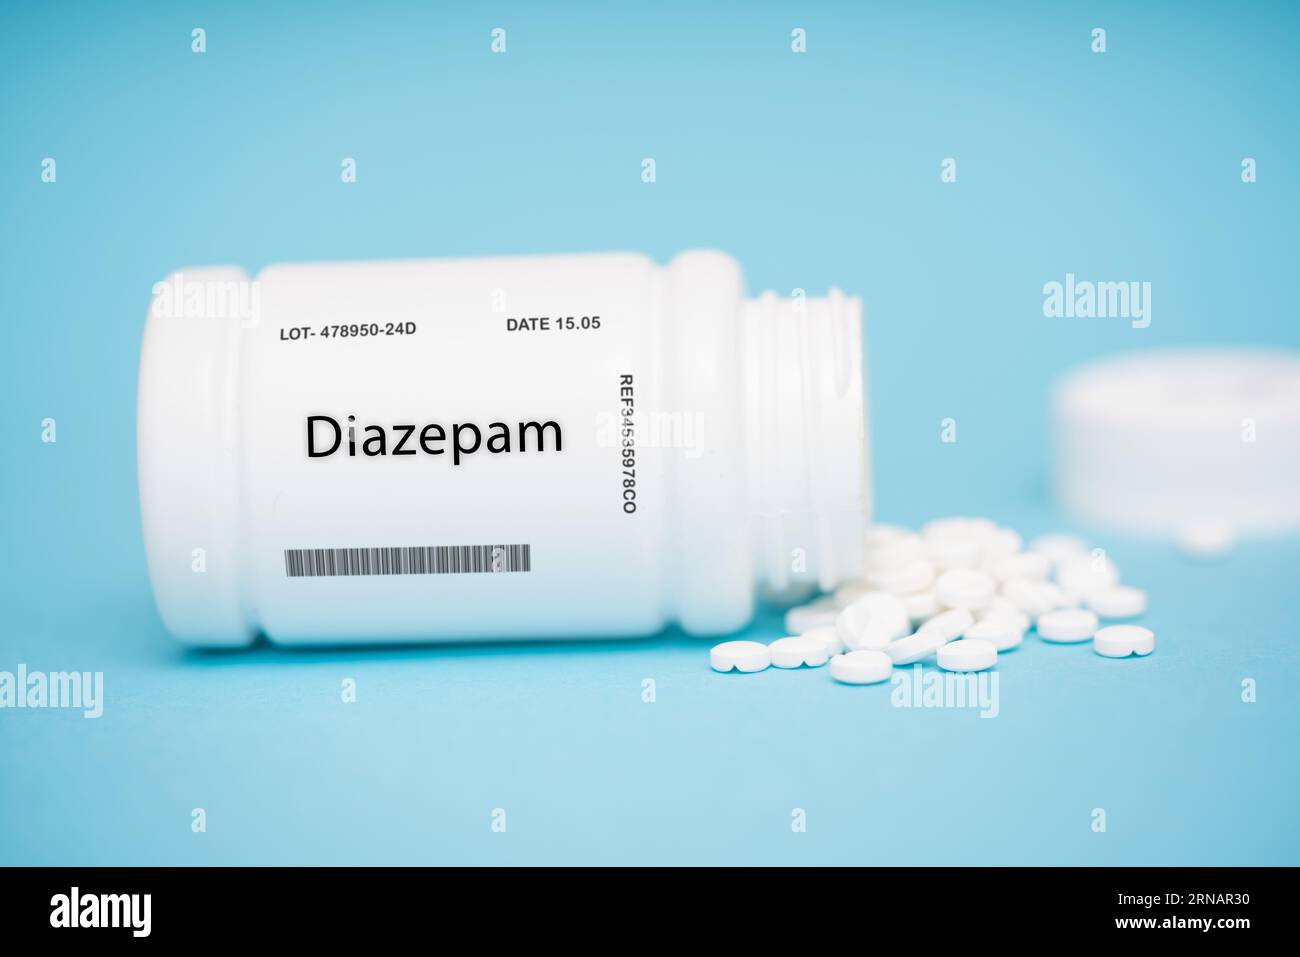 Diazepam A medication used to treat anxiety seizures and muscle spasms Anxiety seizures muscle spasms Tablet injection Stock Photo